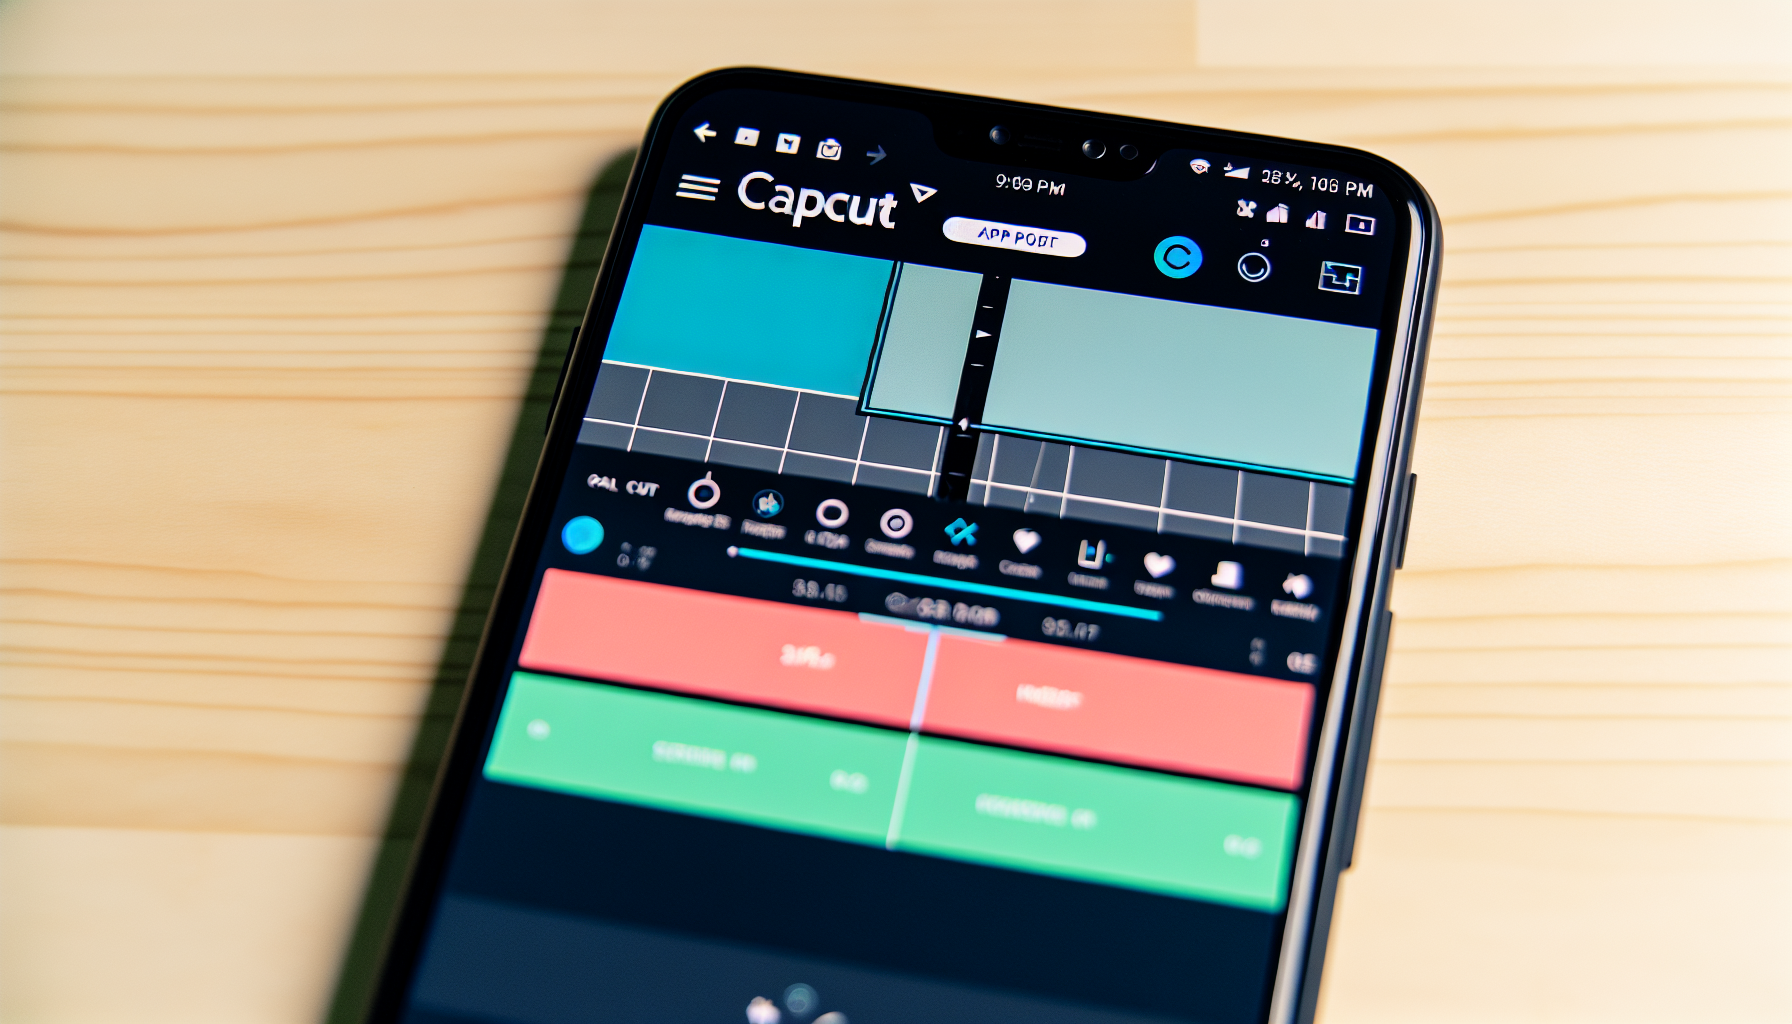 CapCut app interface on a mobile device